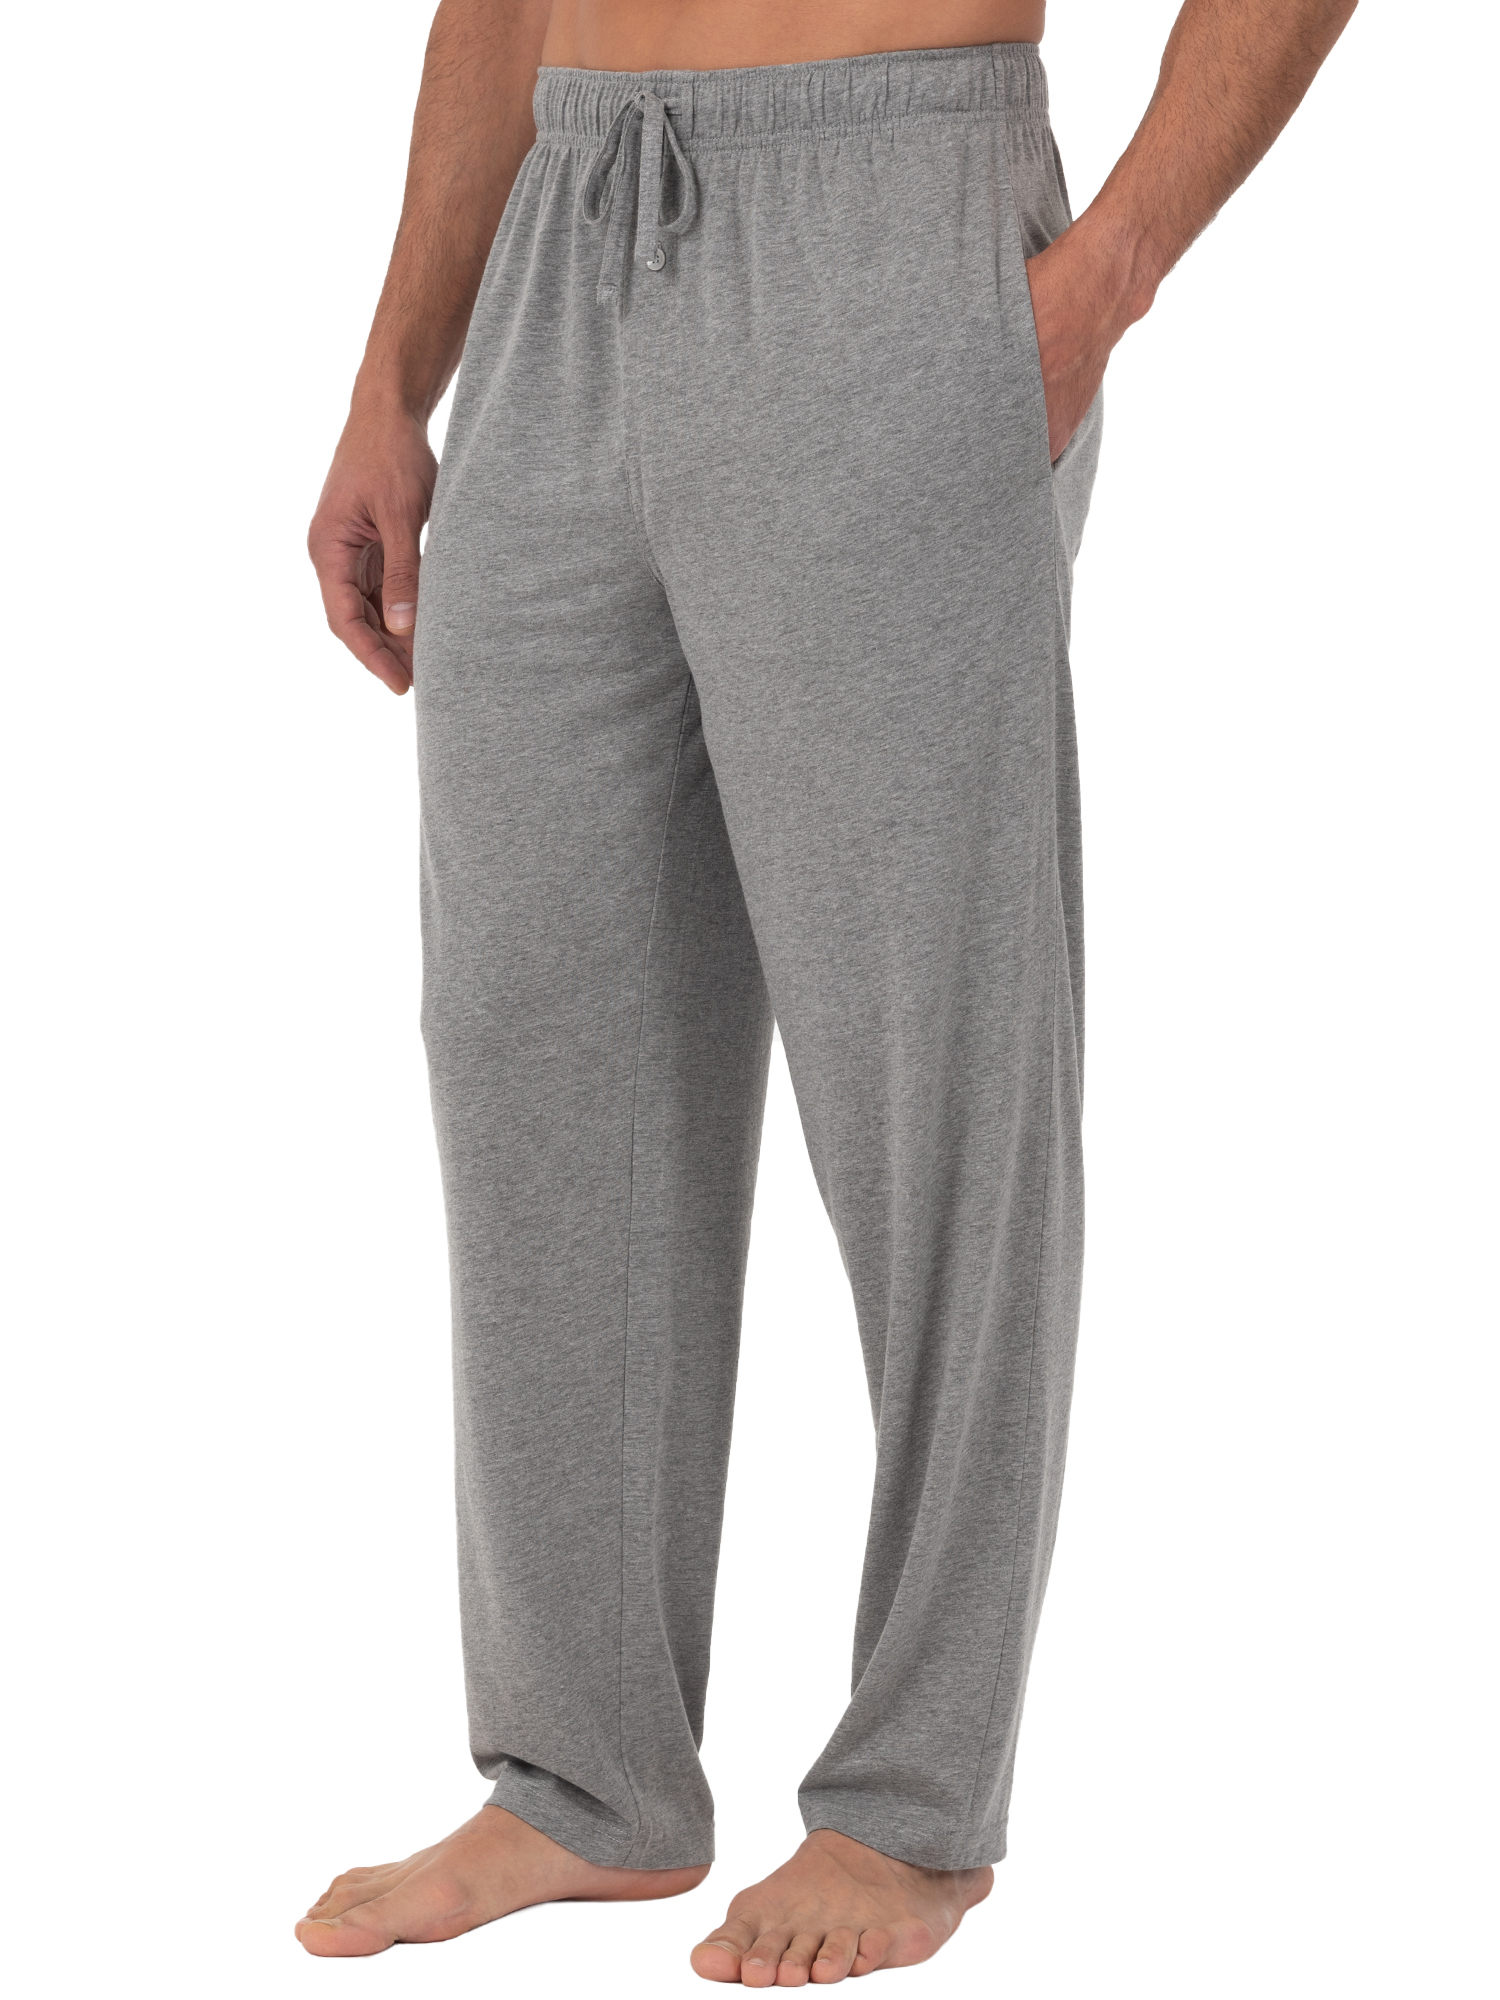 Fruit of the Loom Men's and Big Men's 2-pack Jersey Knit Sleep Pant ...